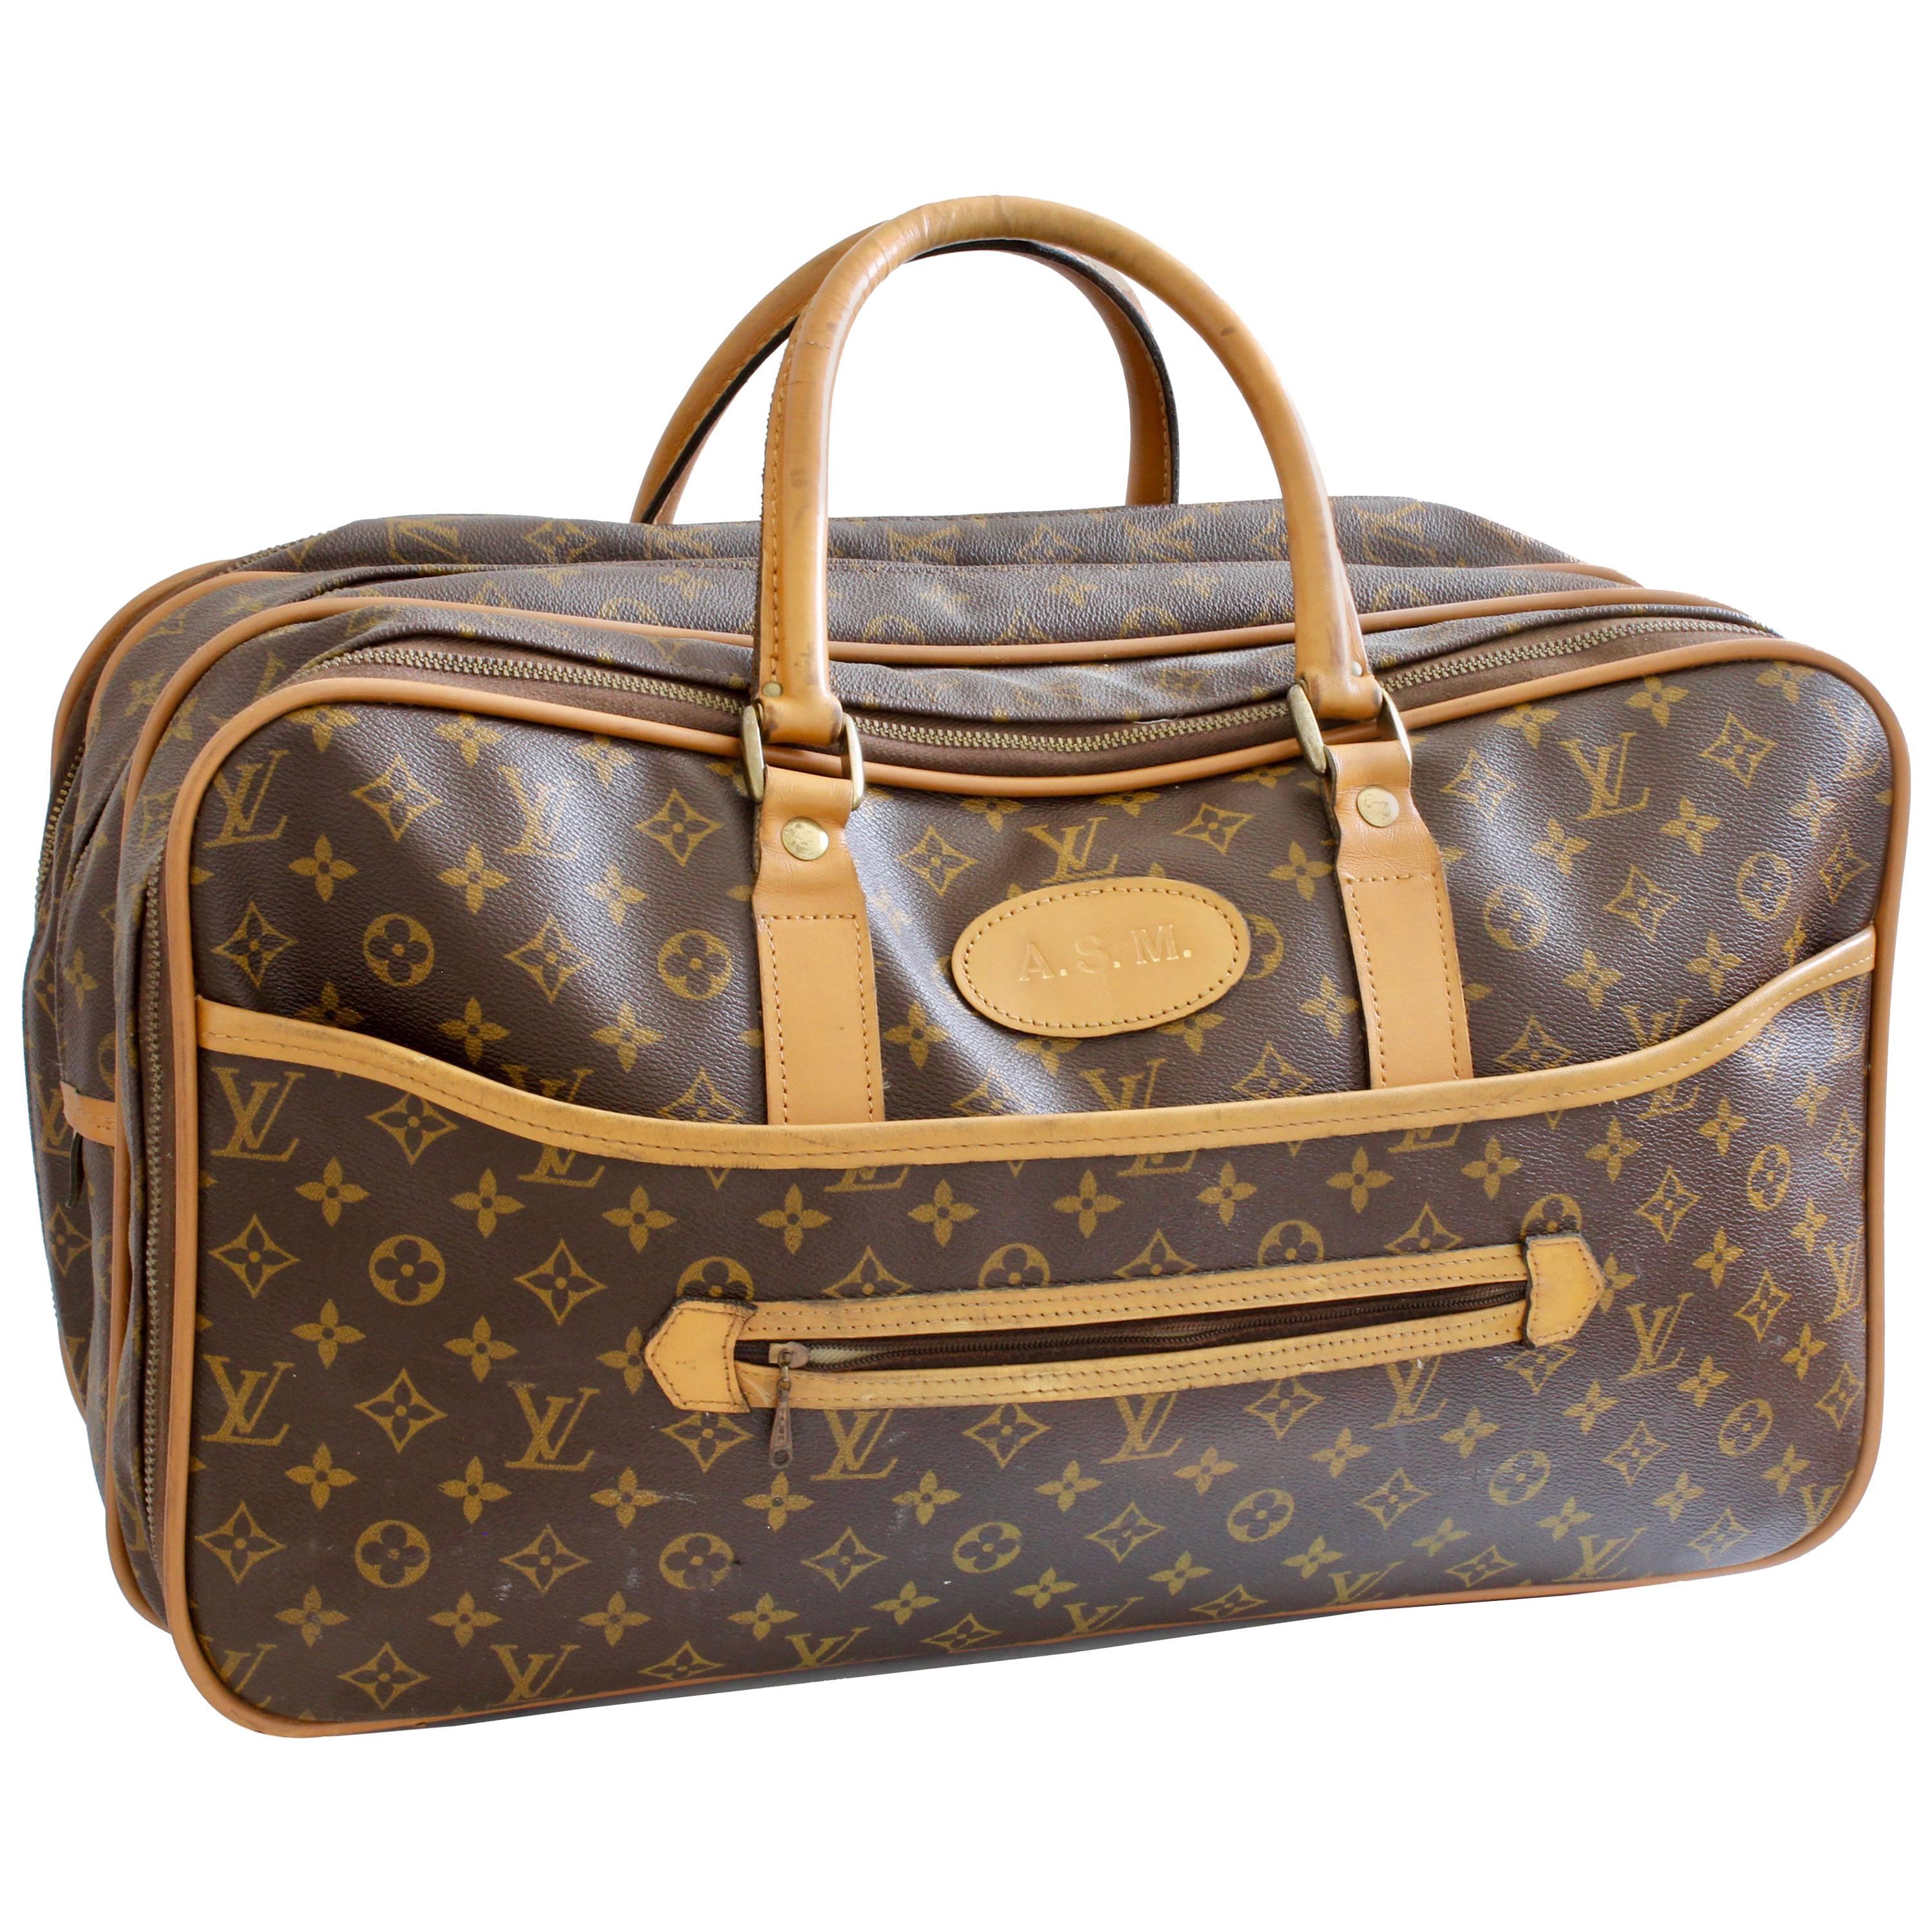 Louis Vuitton Carry All Soft Side Suitcase Weekender Luggage French Company 70s 